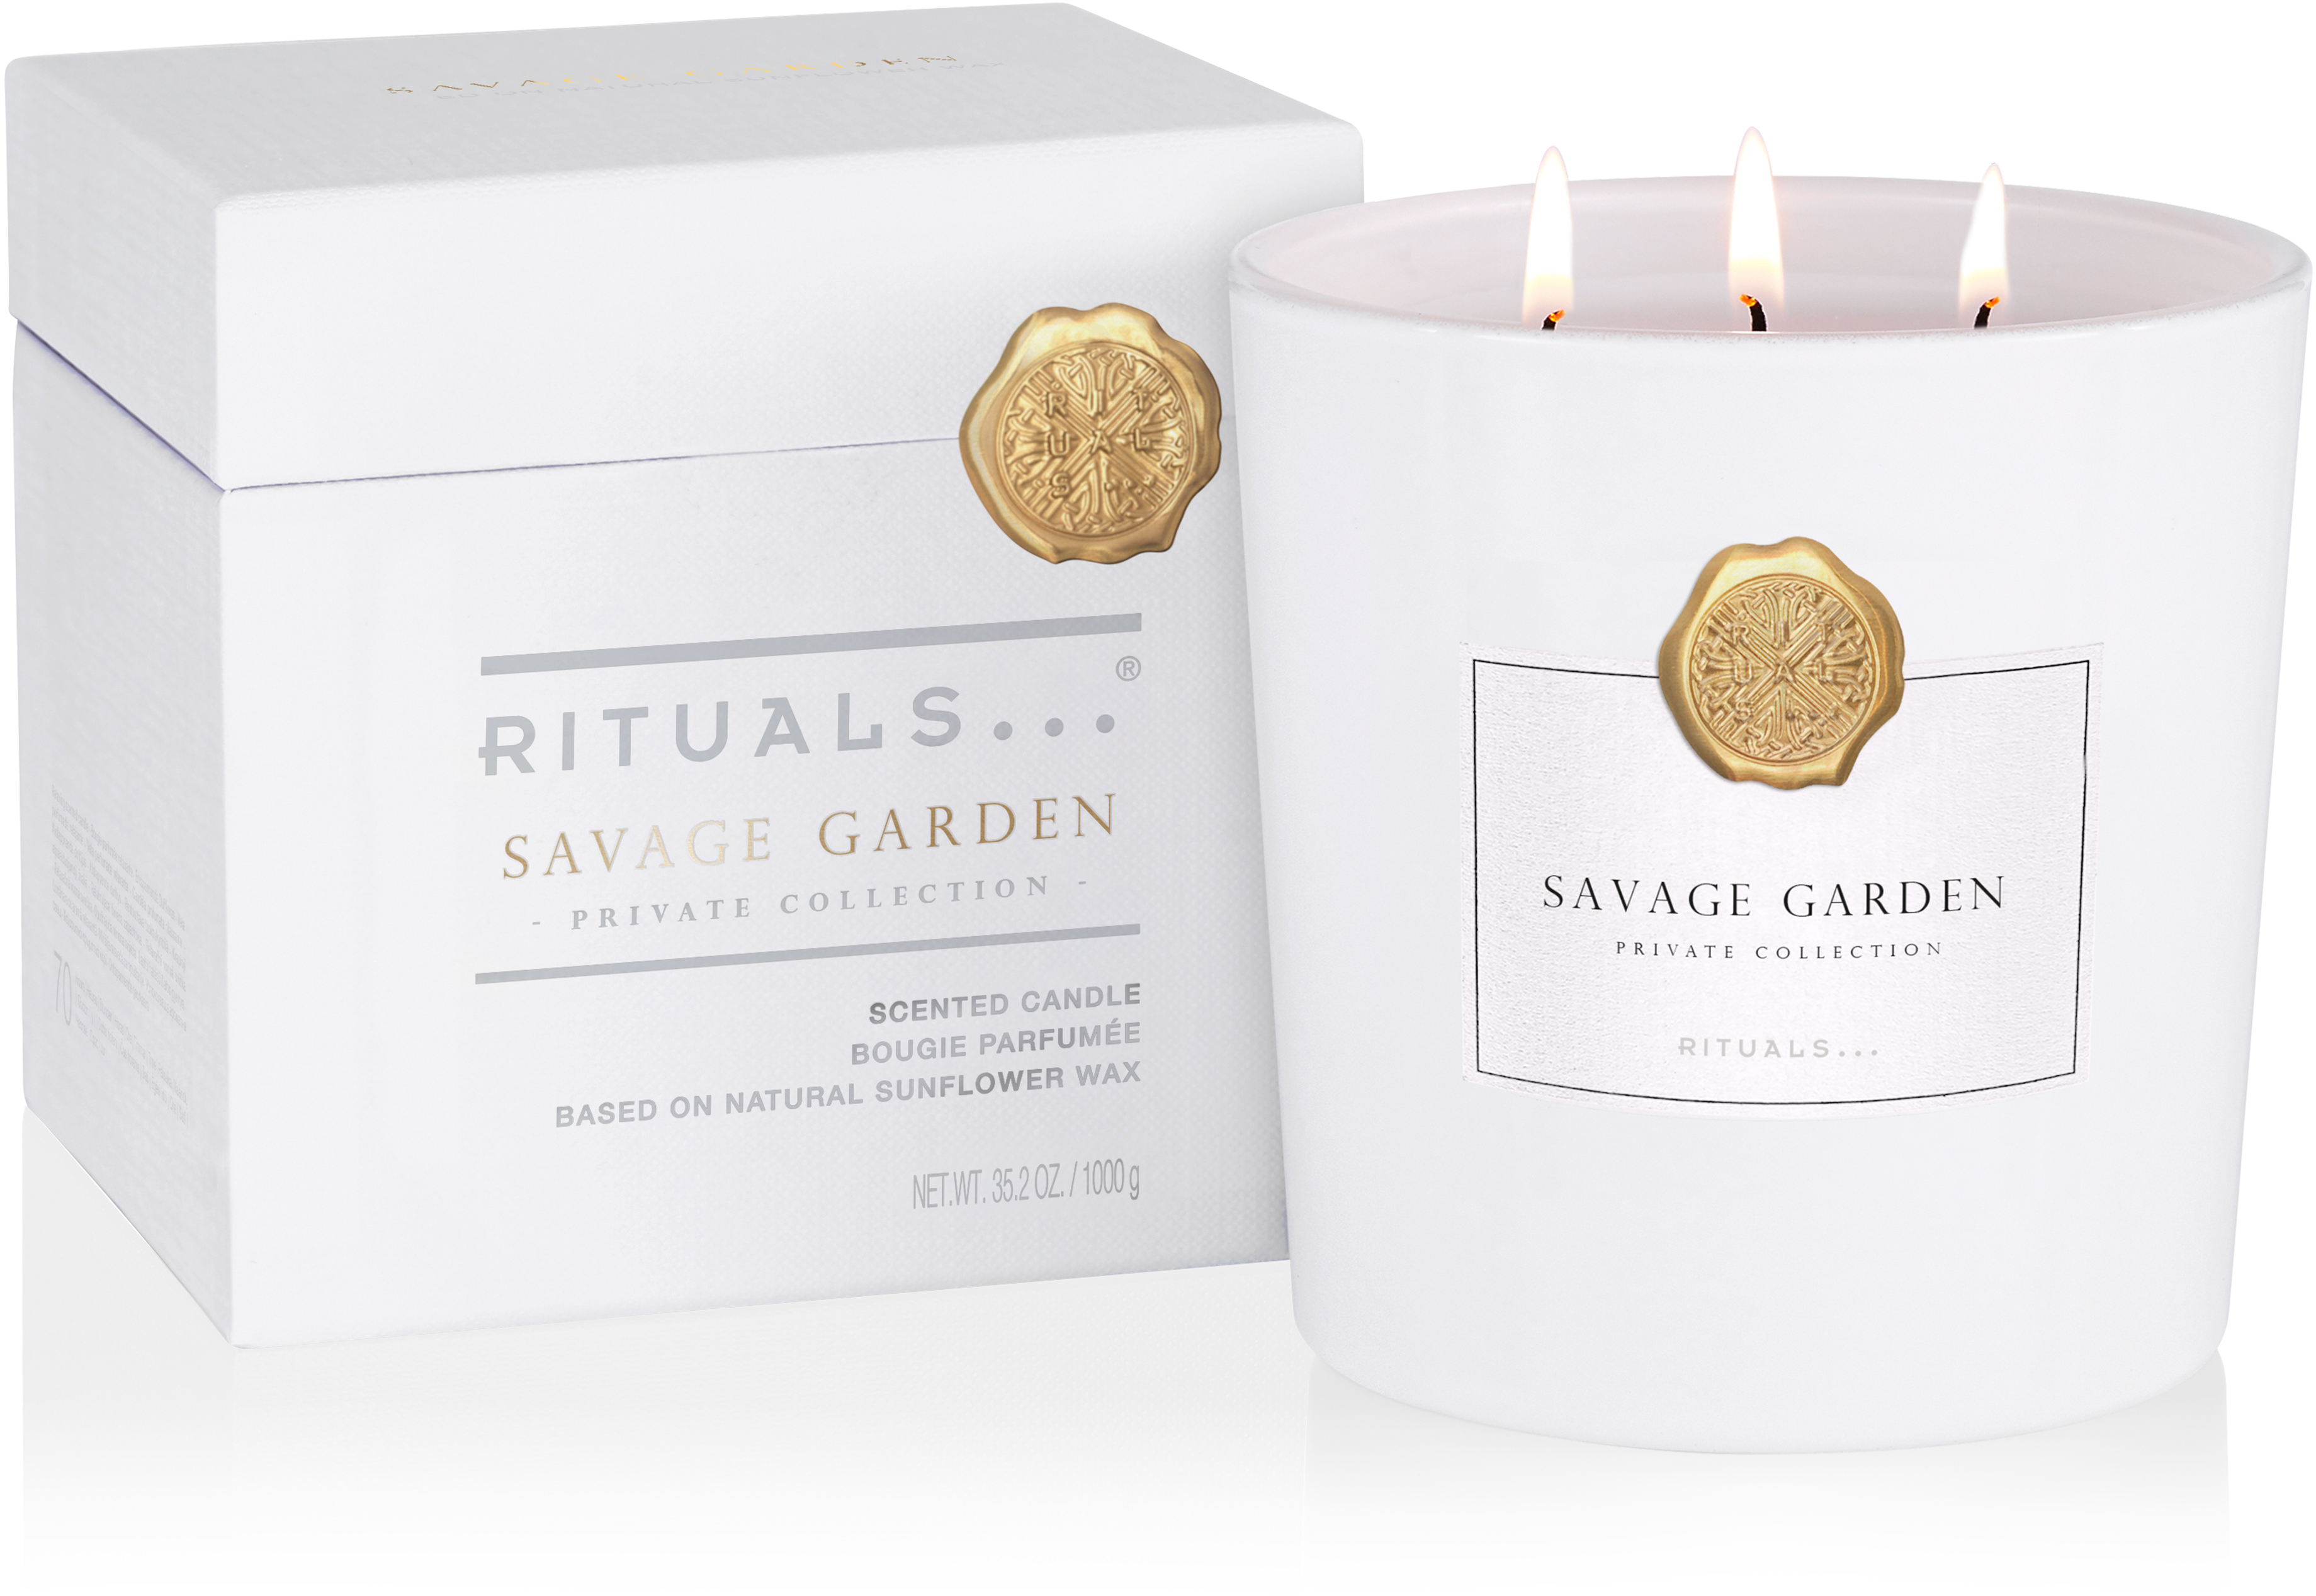 Rituals Savage Garden Scented Candle XL